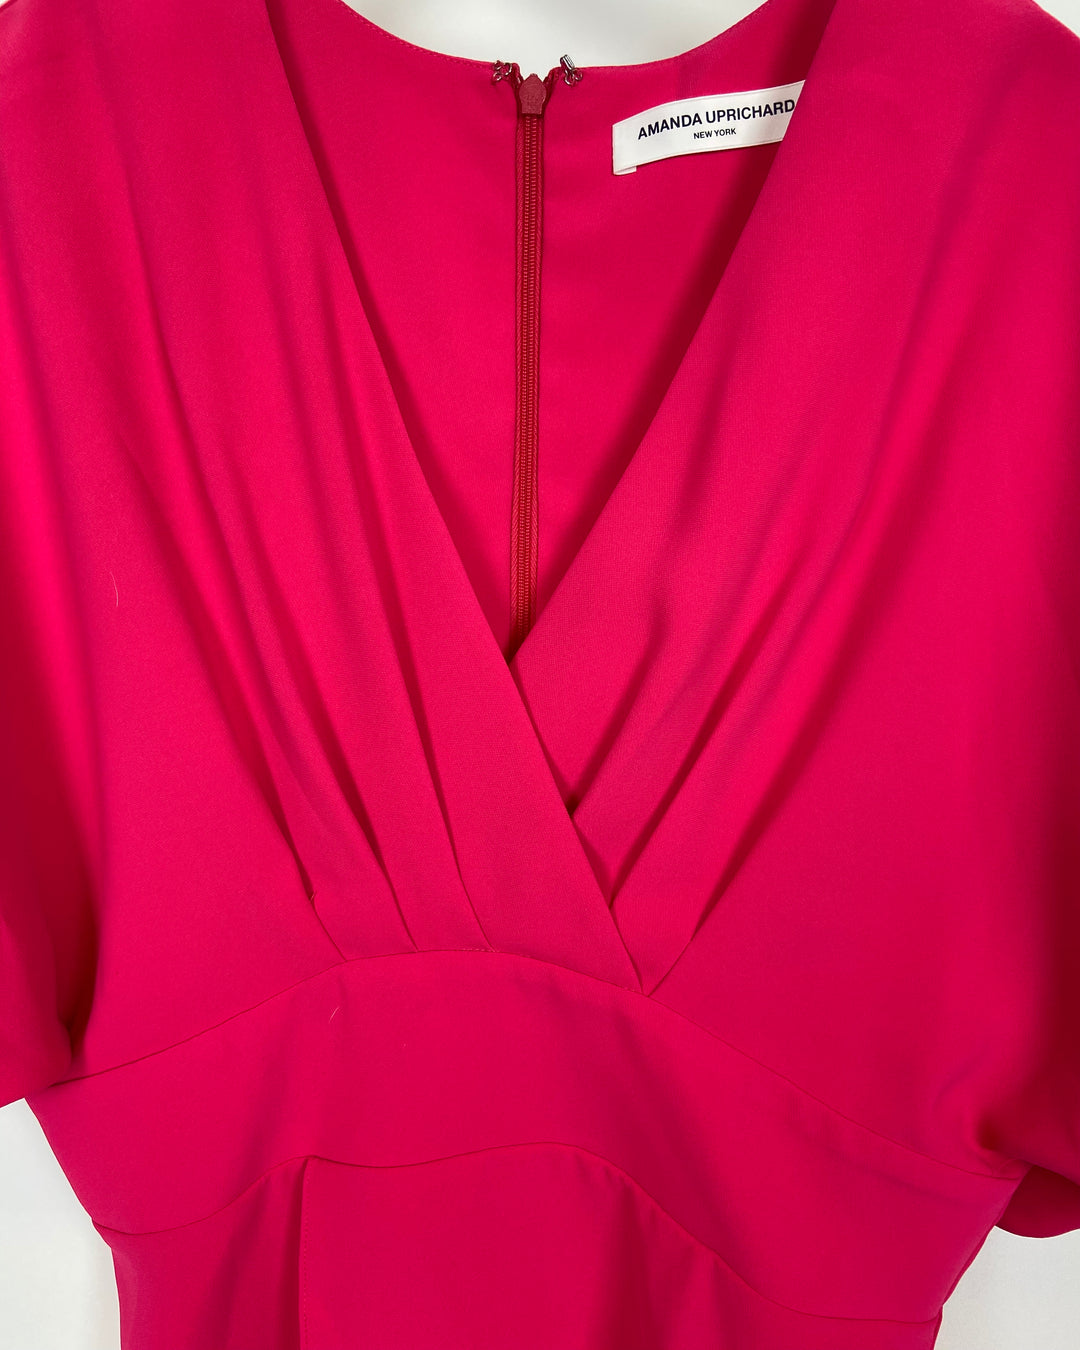 Hot Pink Blouse - Size 4-6